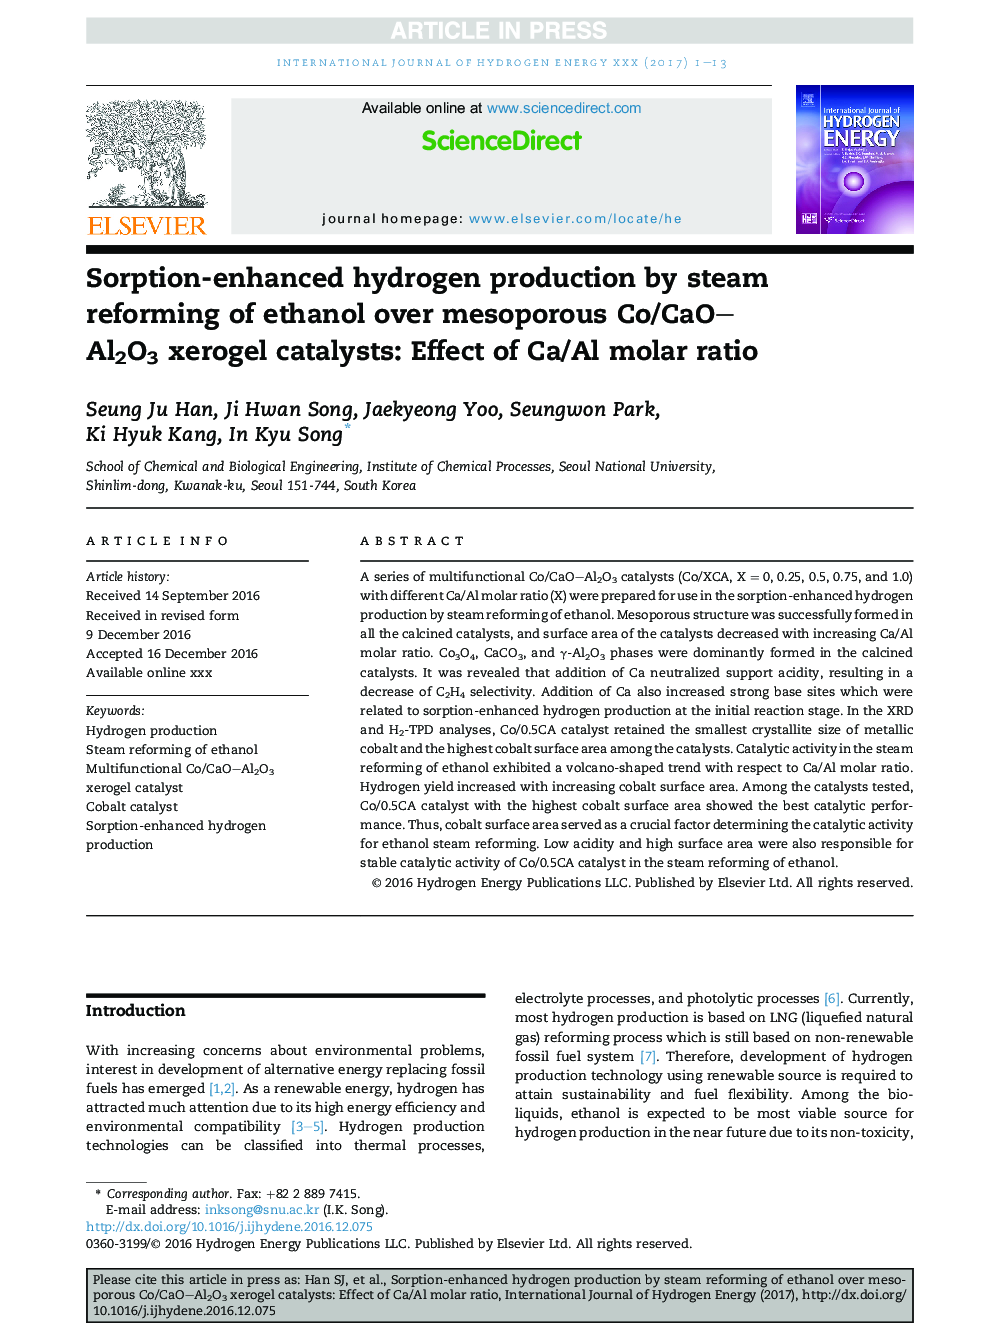 Sorption-enhanced hydrogen production by steam reforming of ethanol over mesoporous Co/CaOAl2O3 xerogel catalysts: Effect of Ca/Al molar ratio